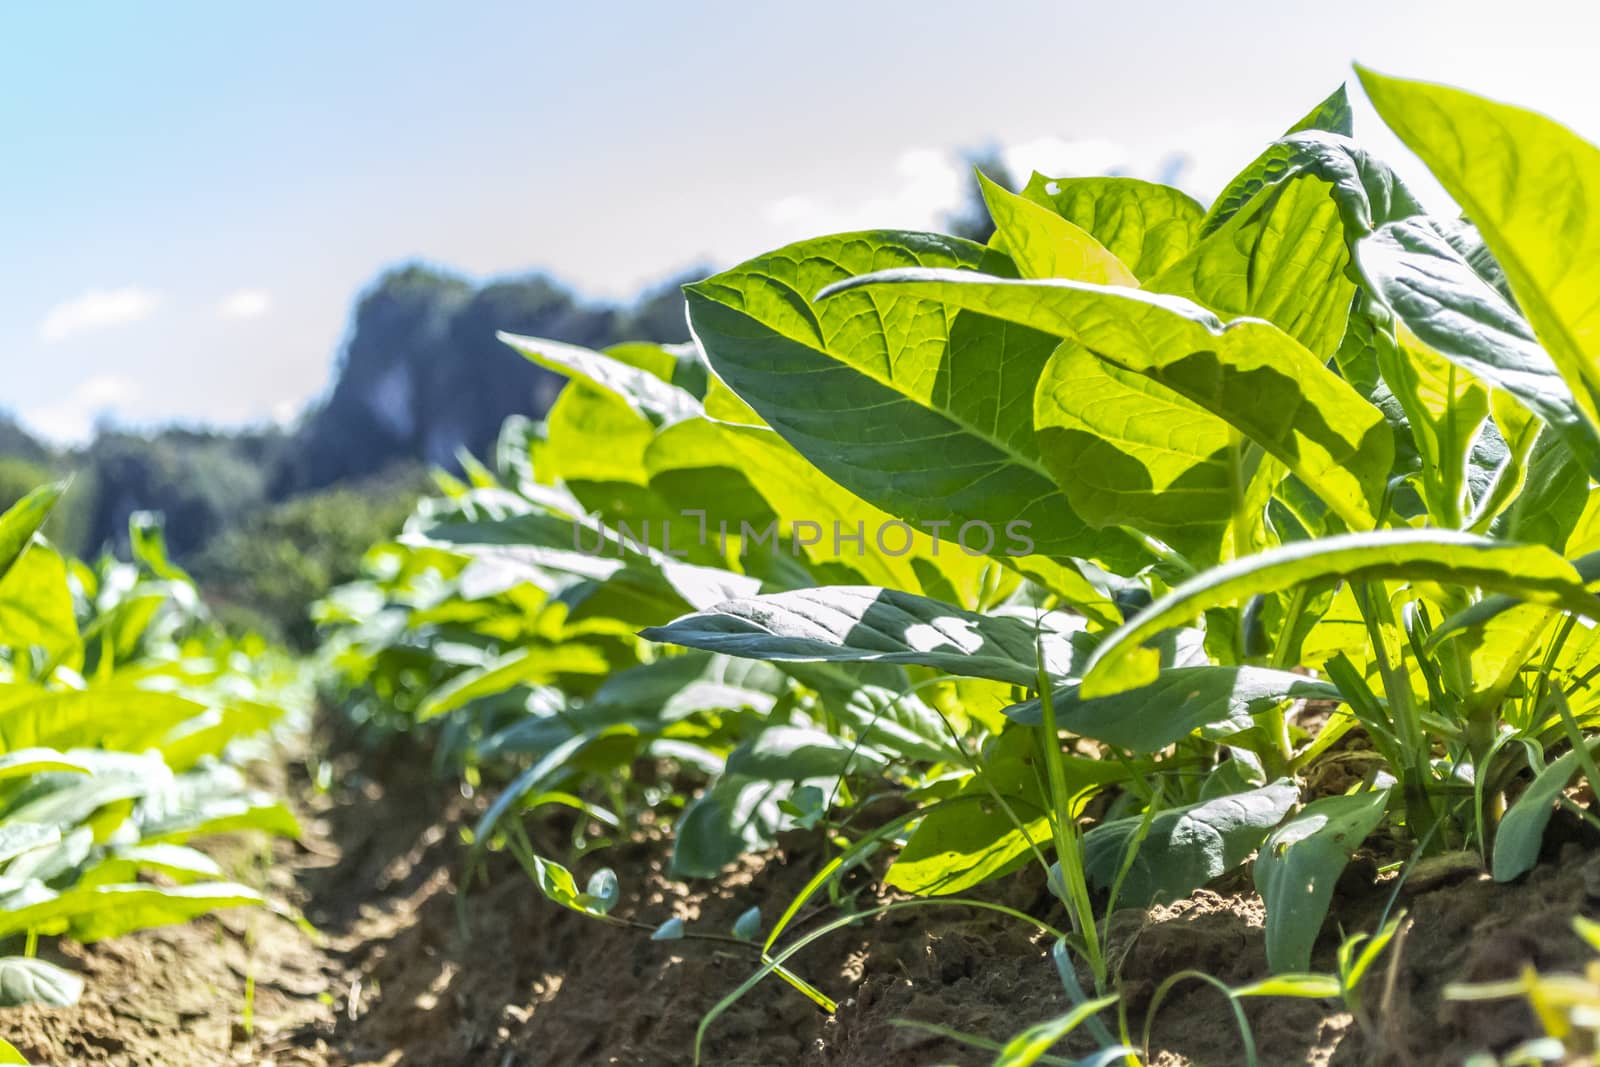 Close-up of tobacco plant at a plantation, soil, and mountains in the background, blurred background